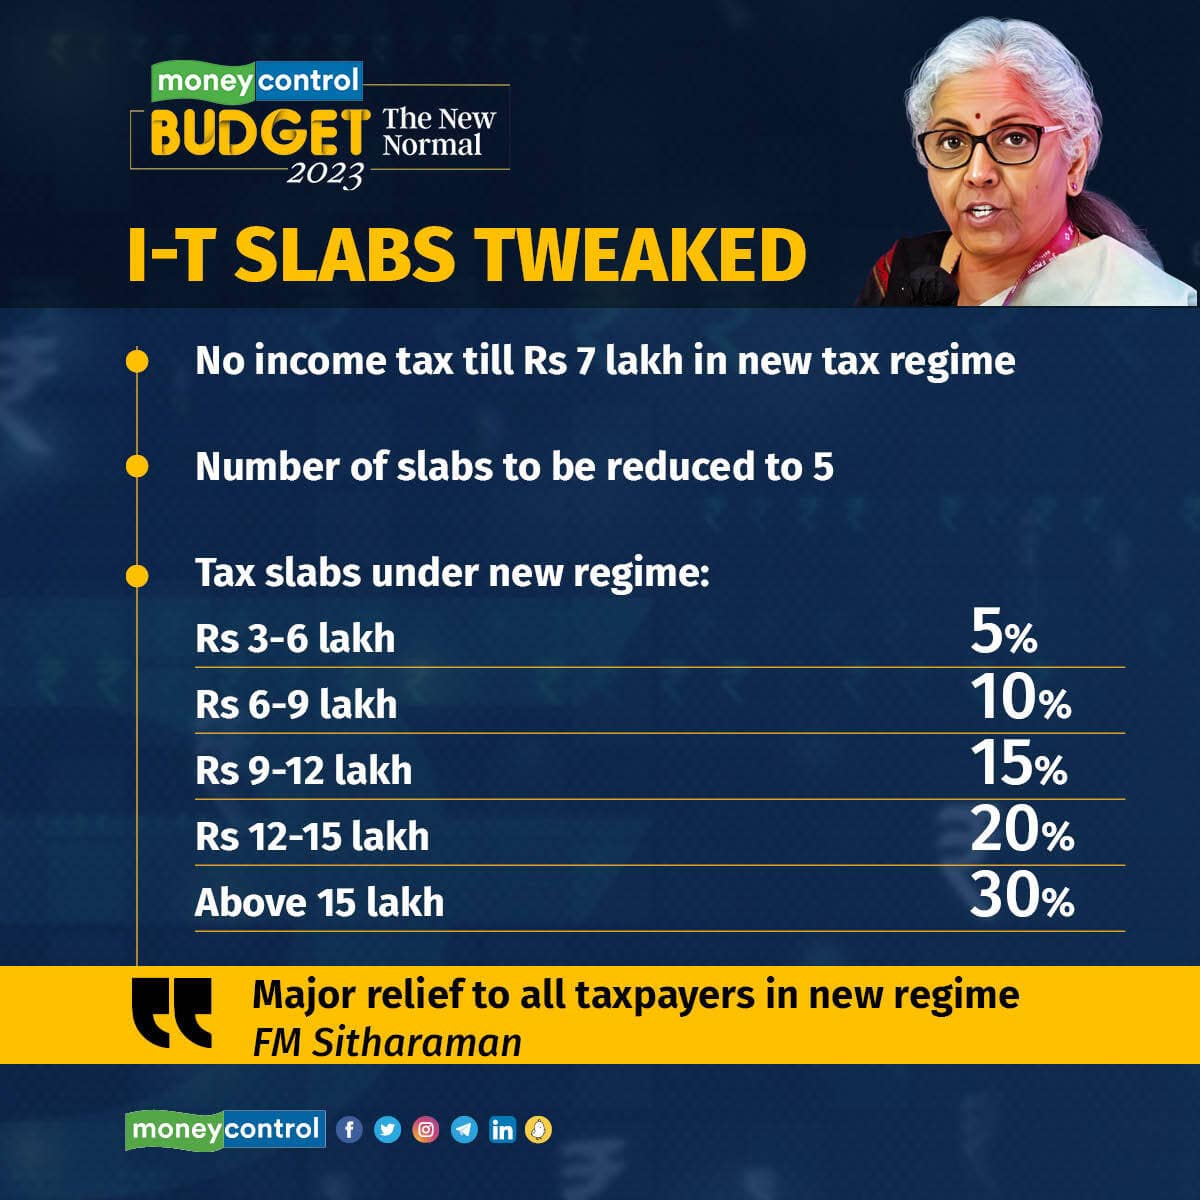 new-slabs-more-rebate-5-big-personal-income-tax-changes-in-budget-2023